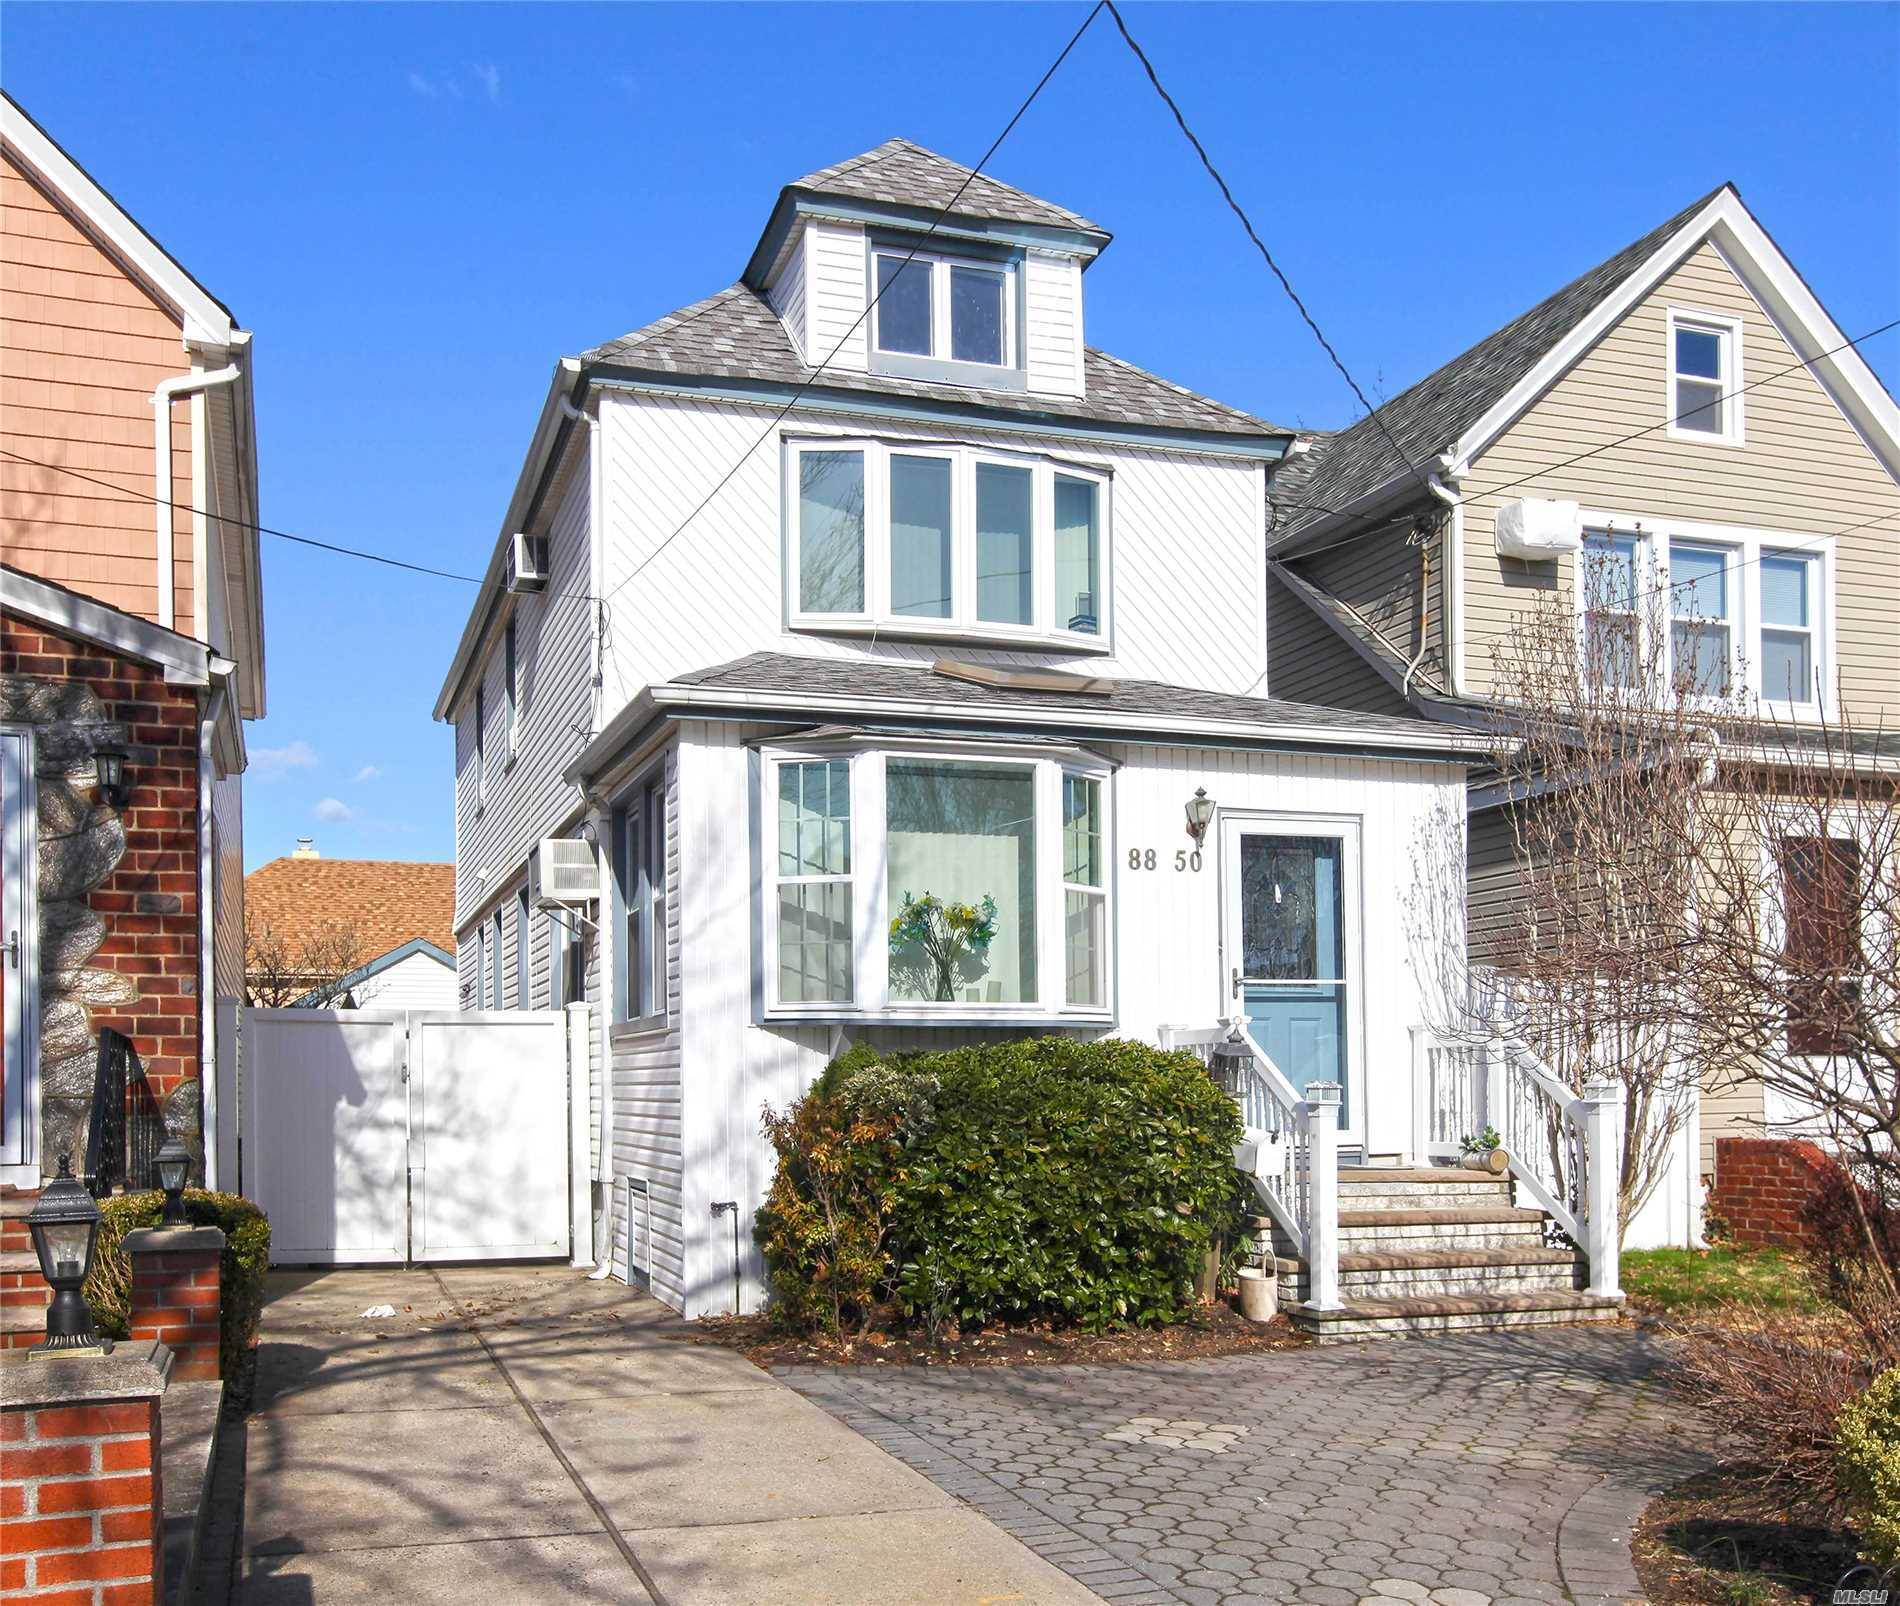 247th 3 BR House LIC / Queens